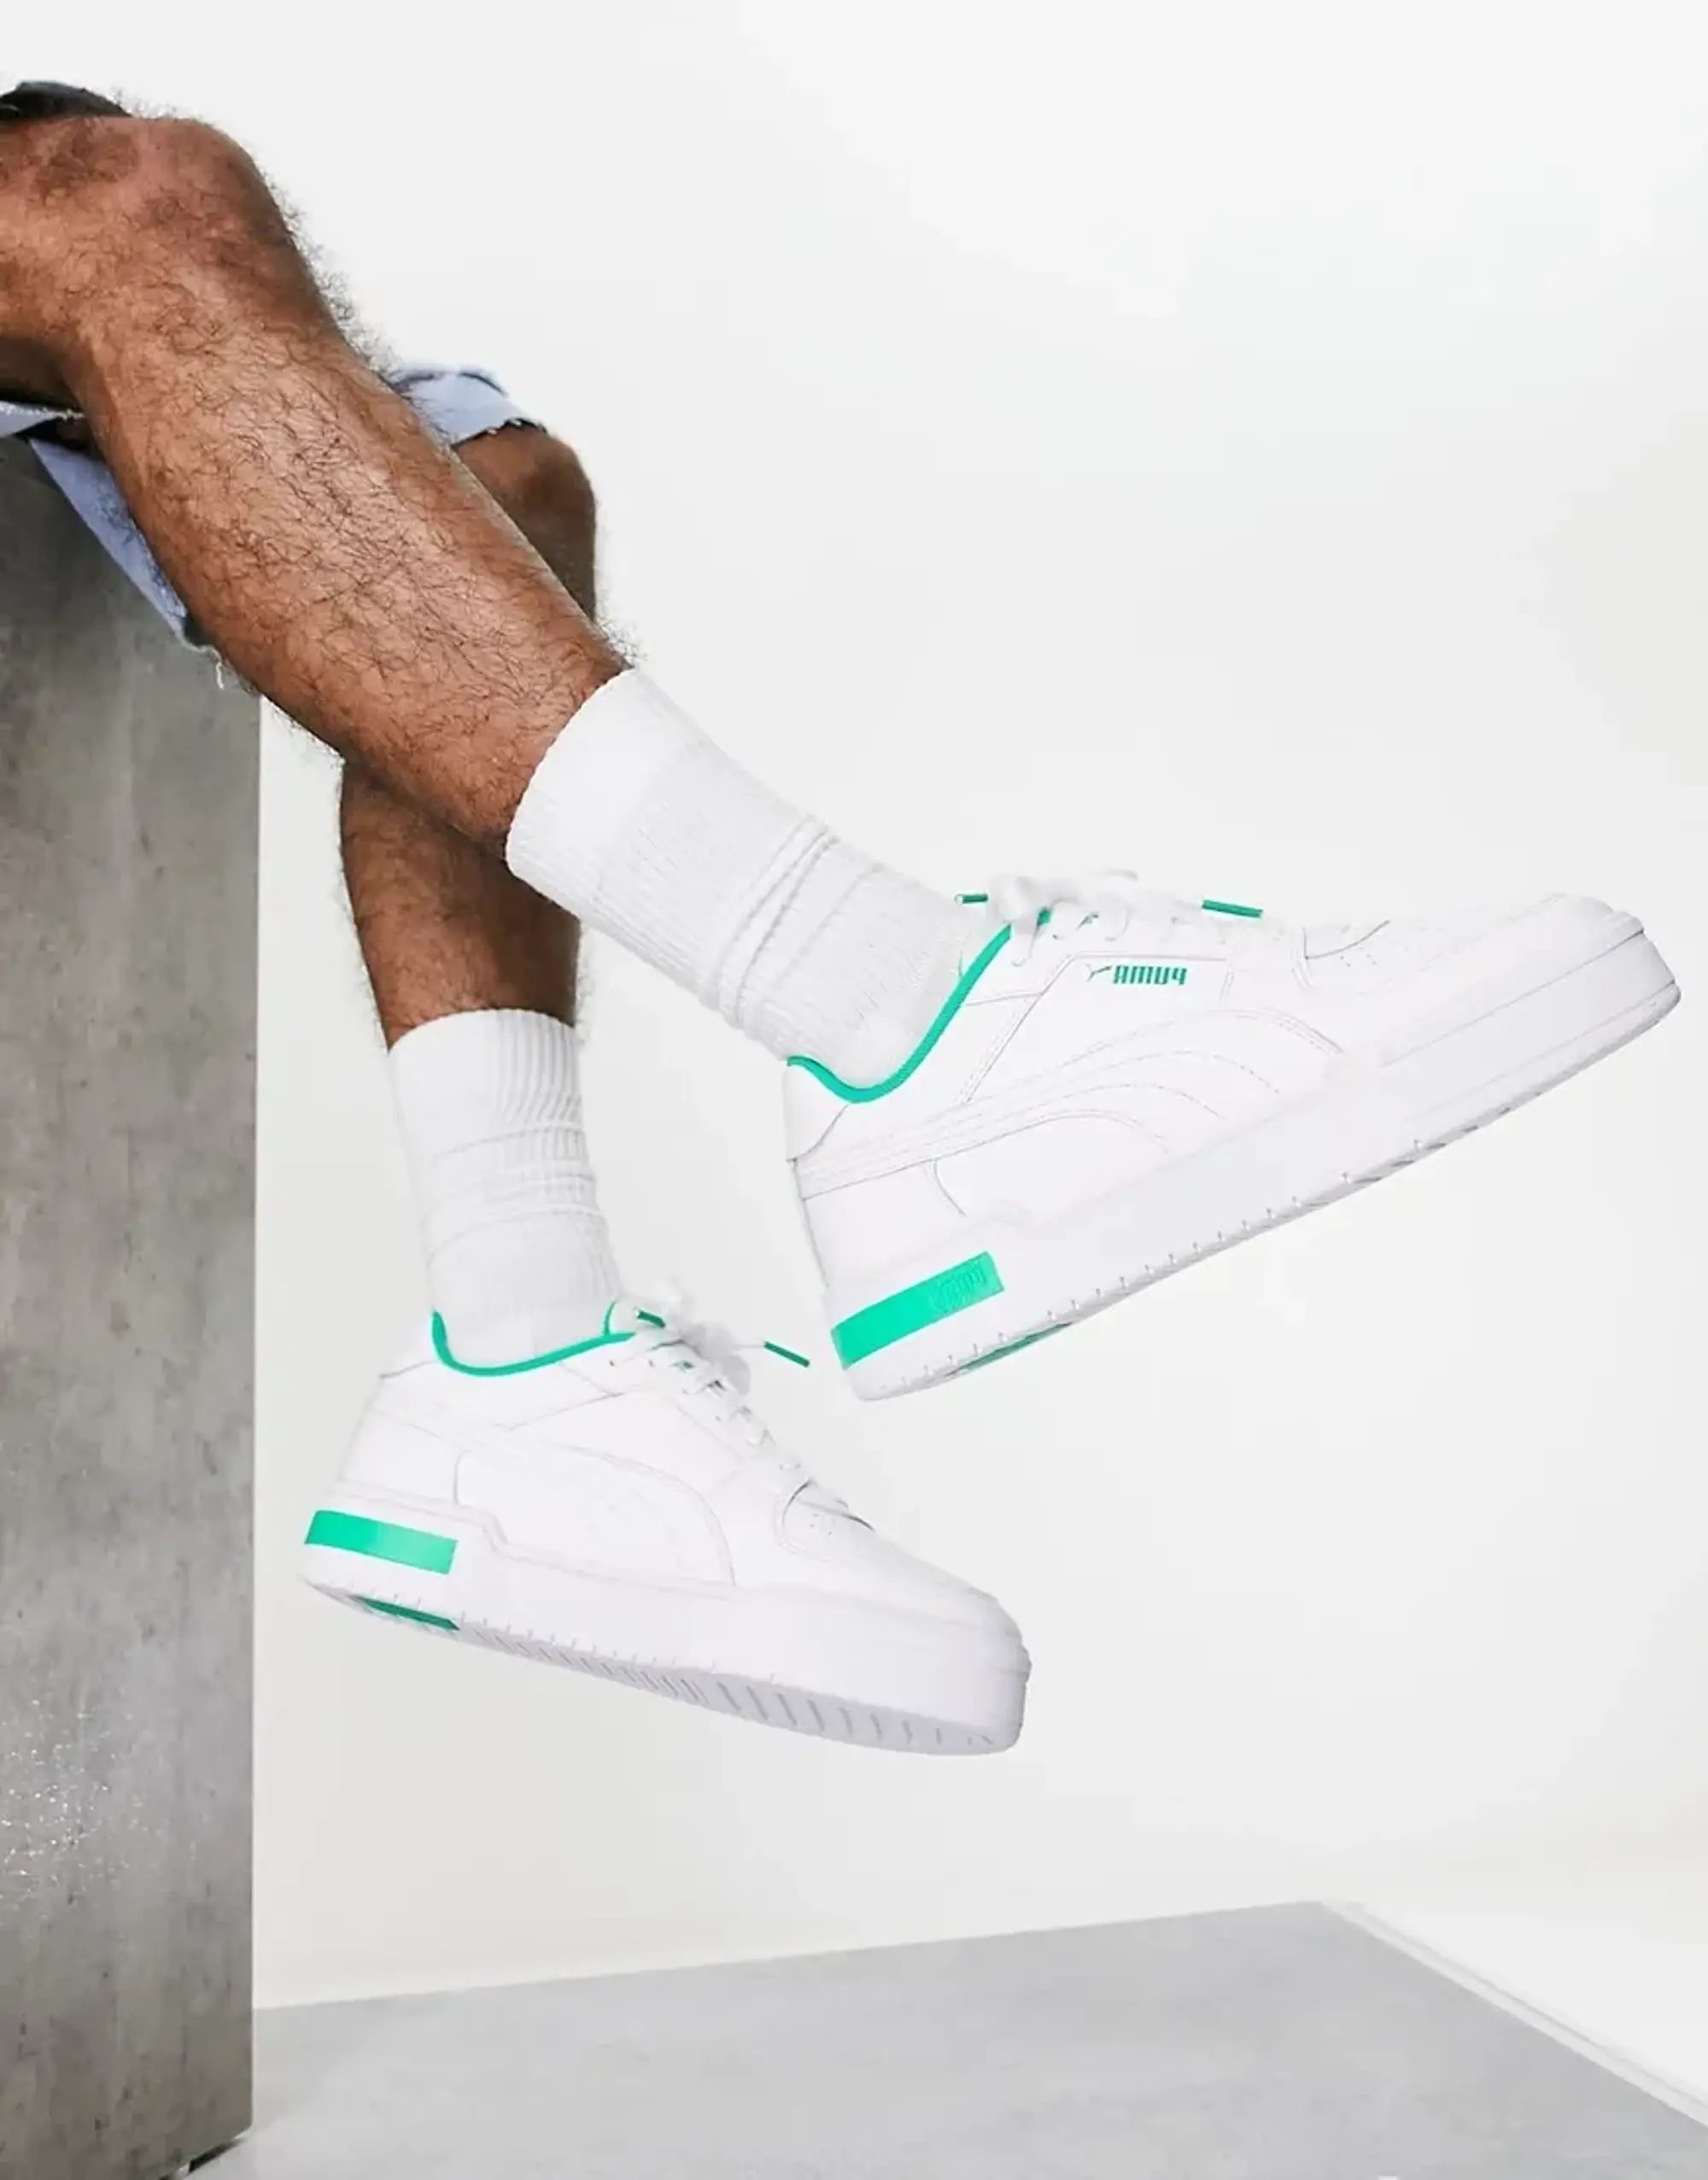 Puma Ca Pro Acid Brights Trainers In White With Green Detail - Exclusive To Asos-Multi